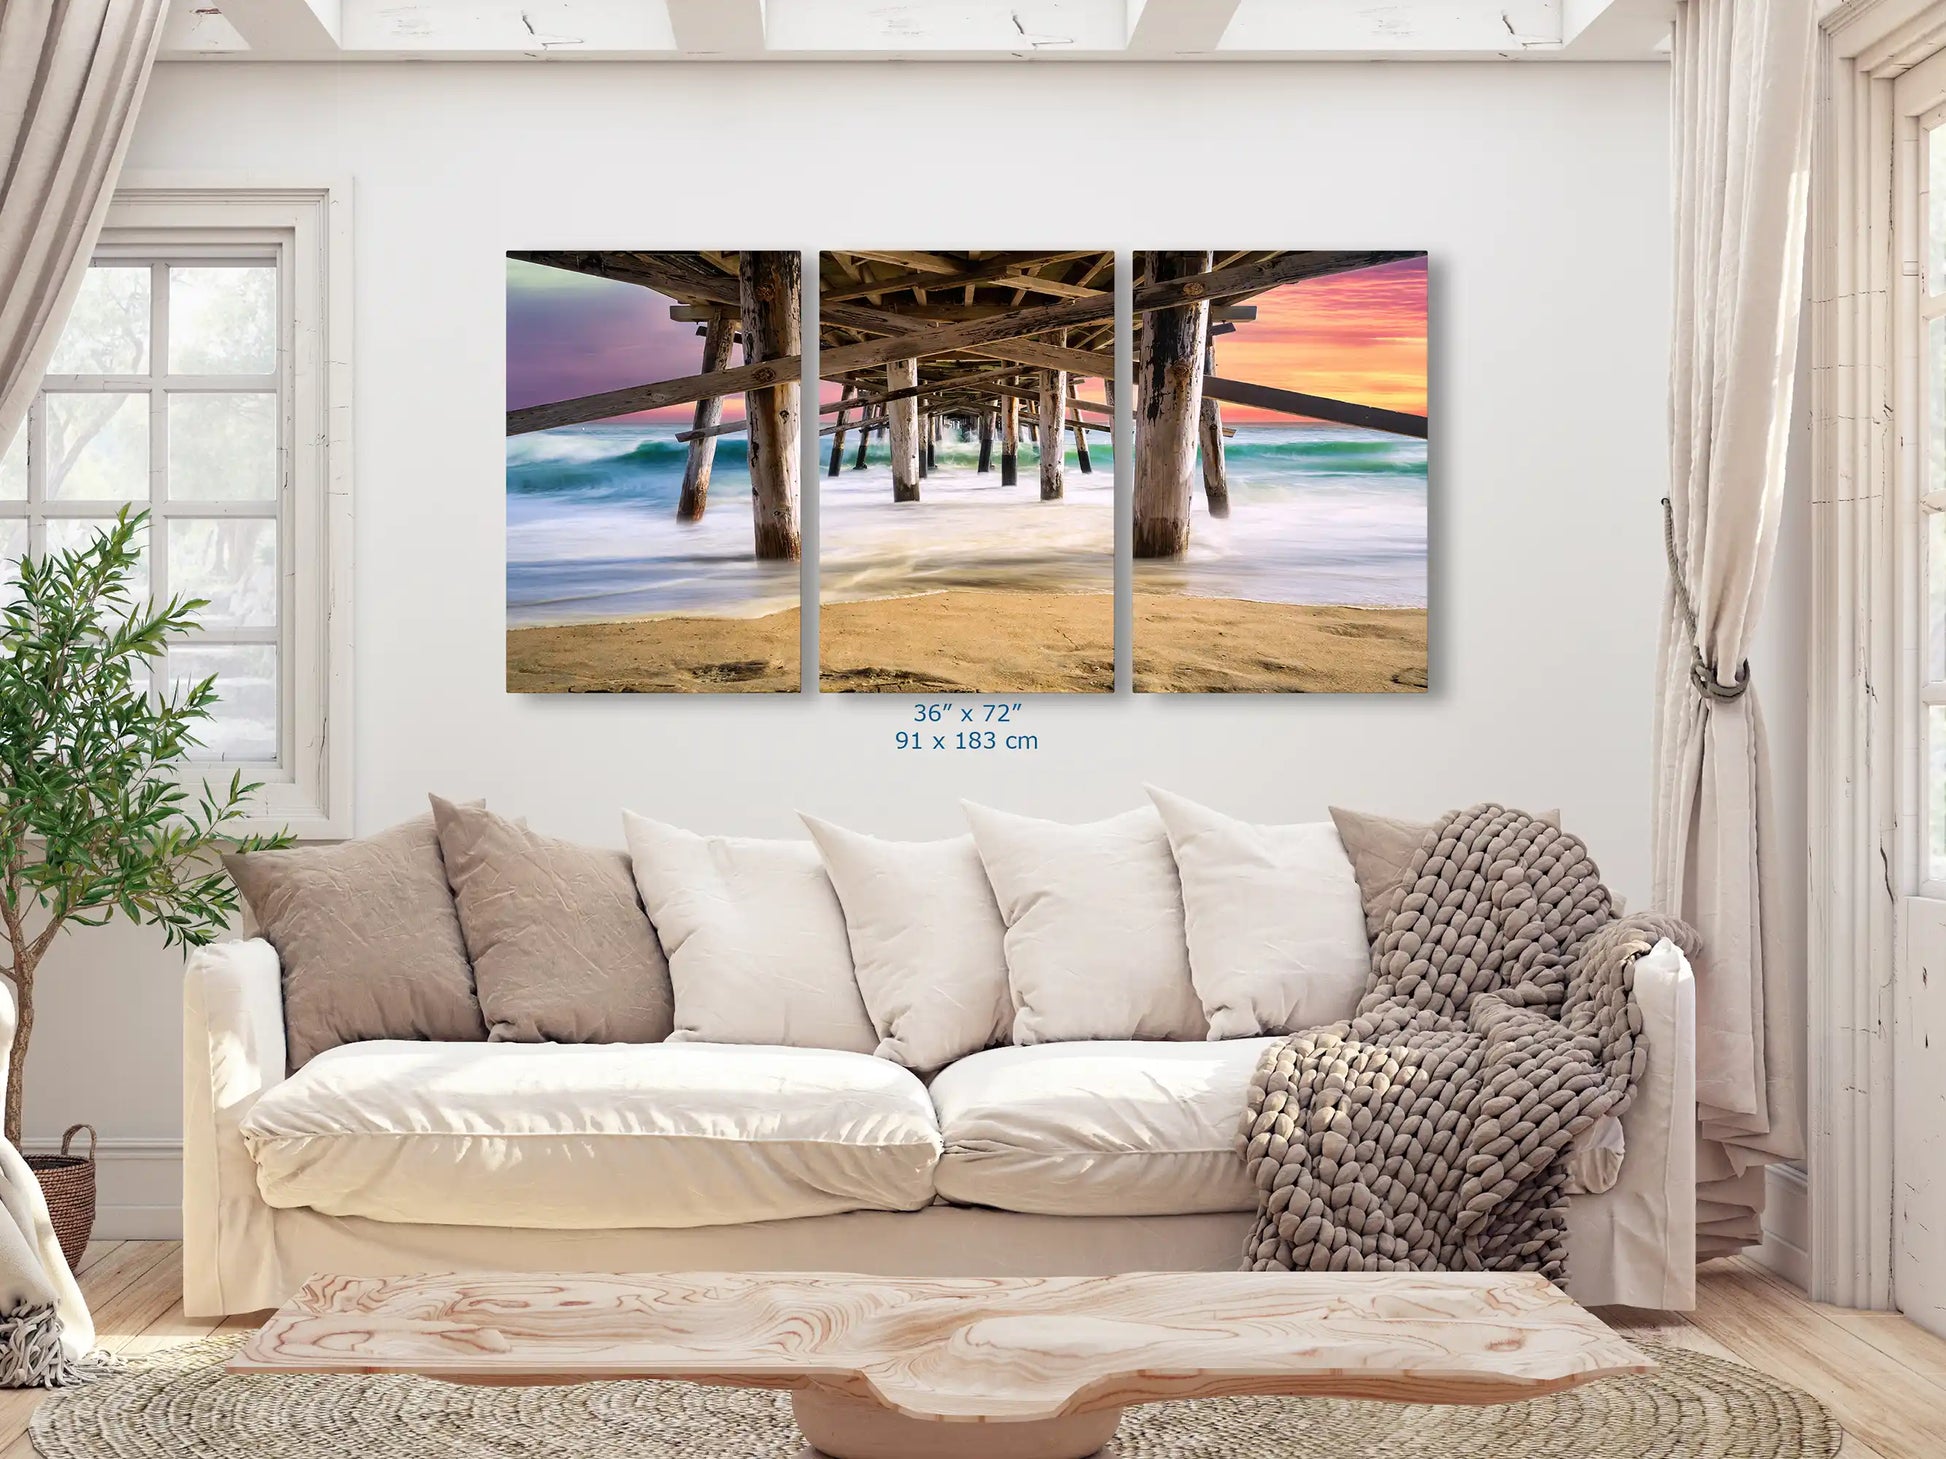 Expansive wall art of Balboa Pier at sunset in a living room, stretching 36x72, becoming the focal point of the space.